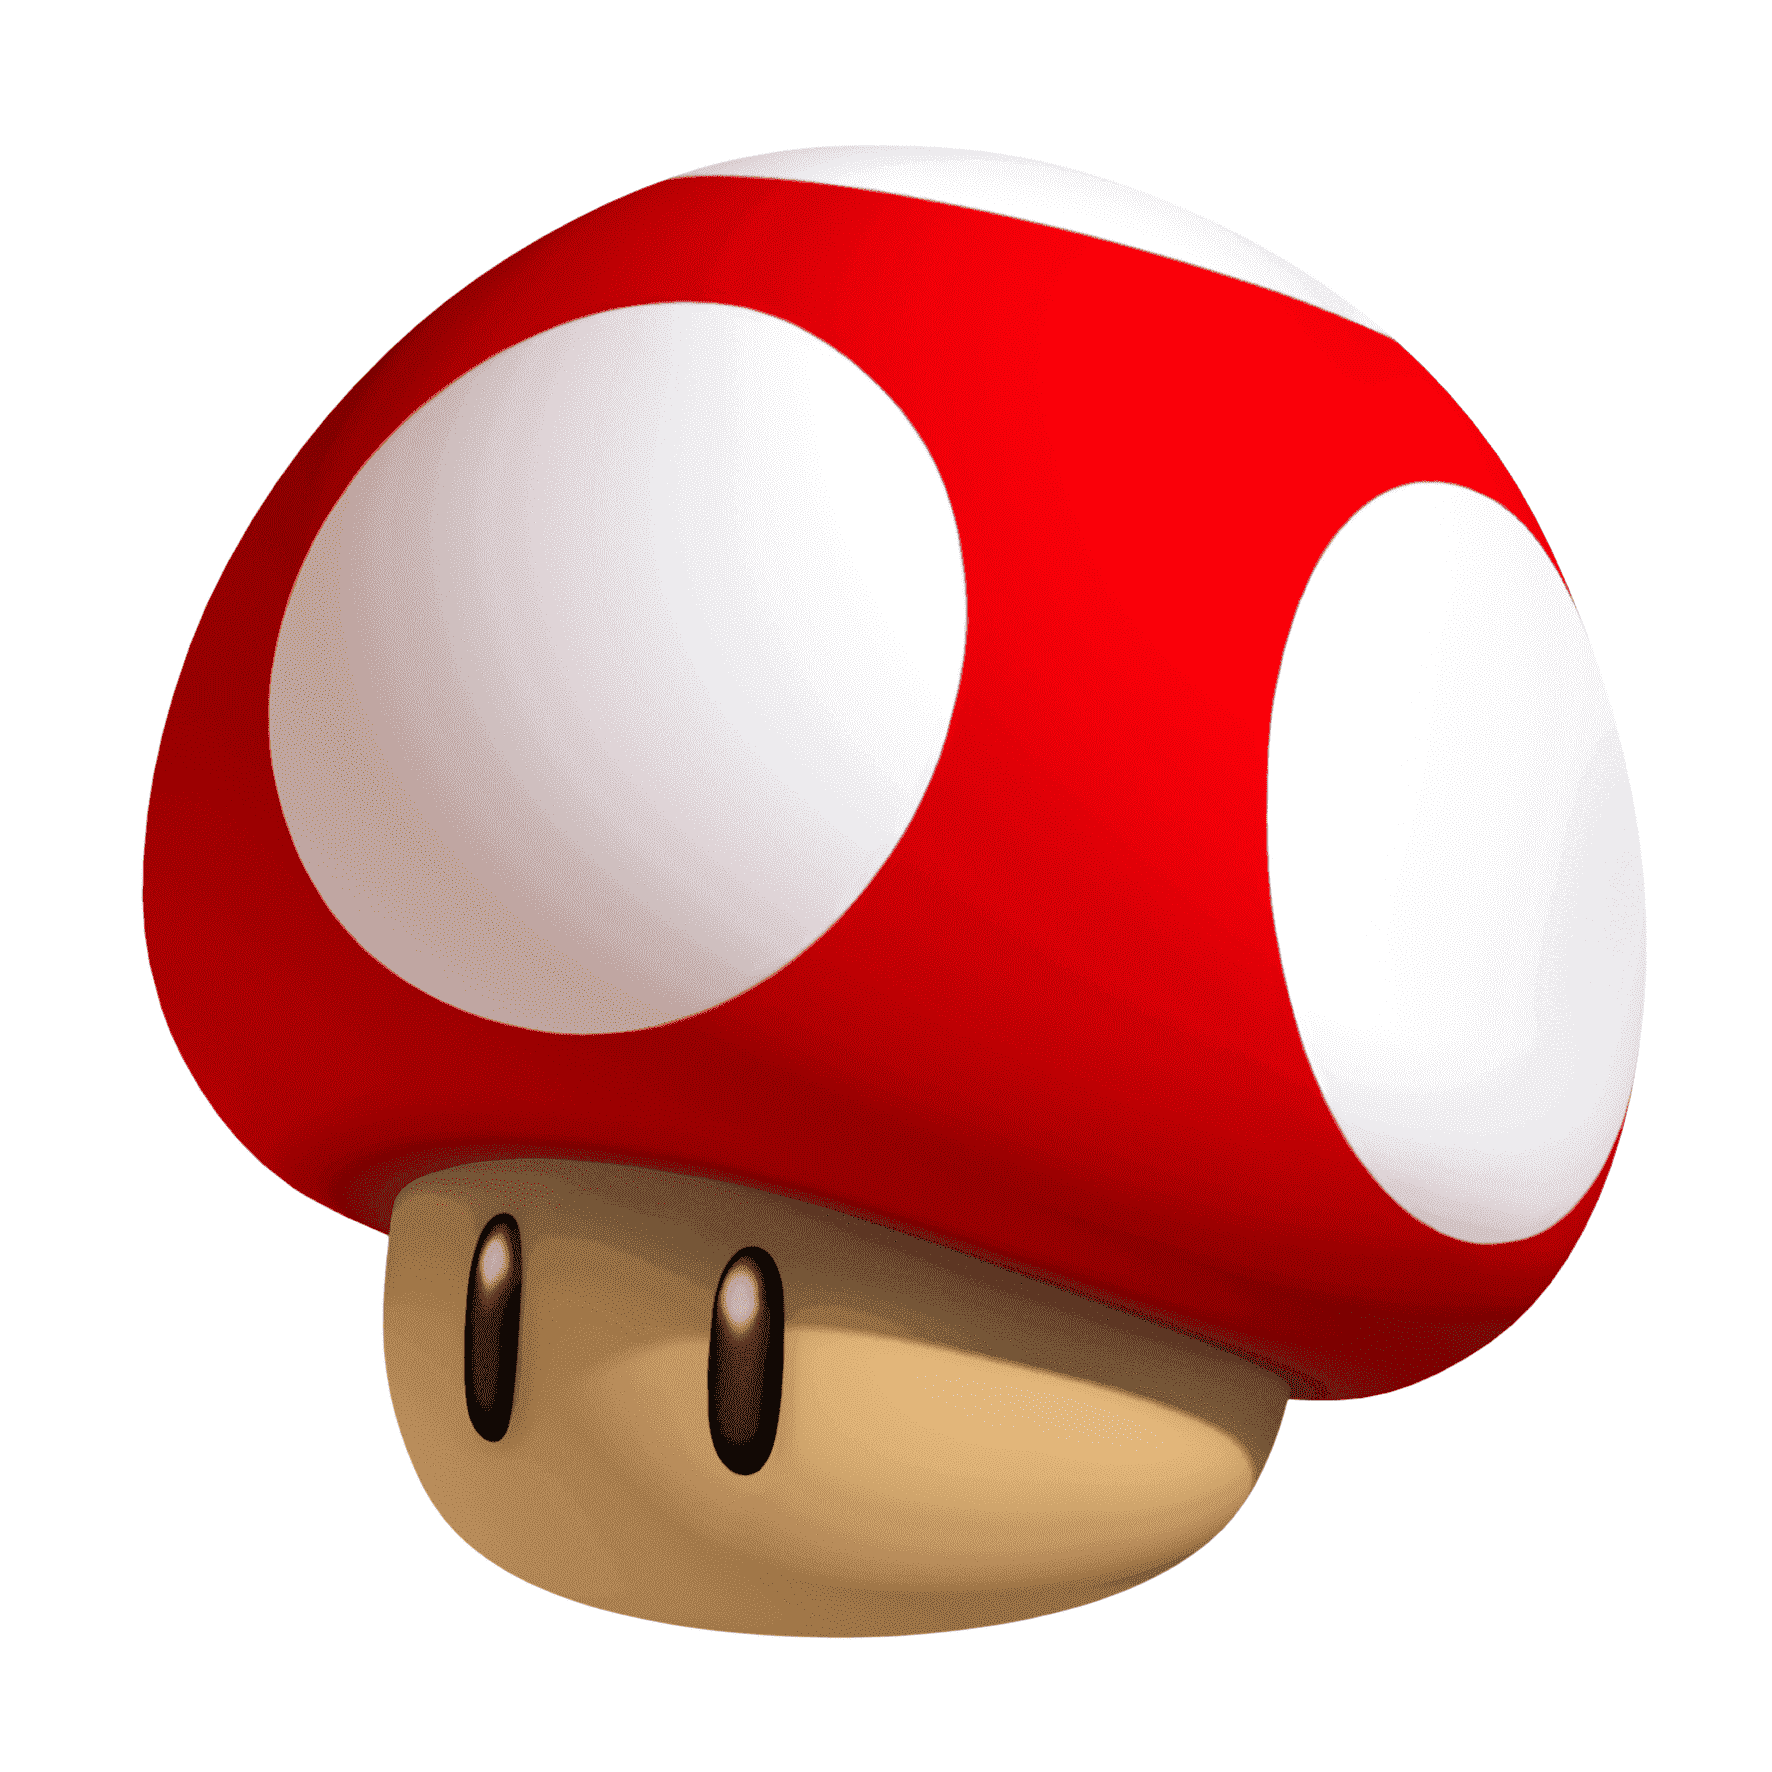 a2c037ca66b2d17e69e81190a56f3aa7_mario-mushrooms-and-search-on-mario-mushroom-clipart-no-background_1772-1772.png